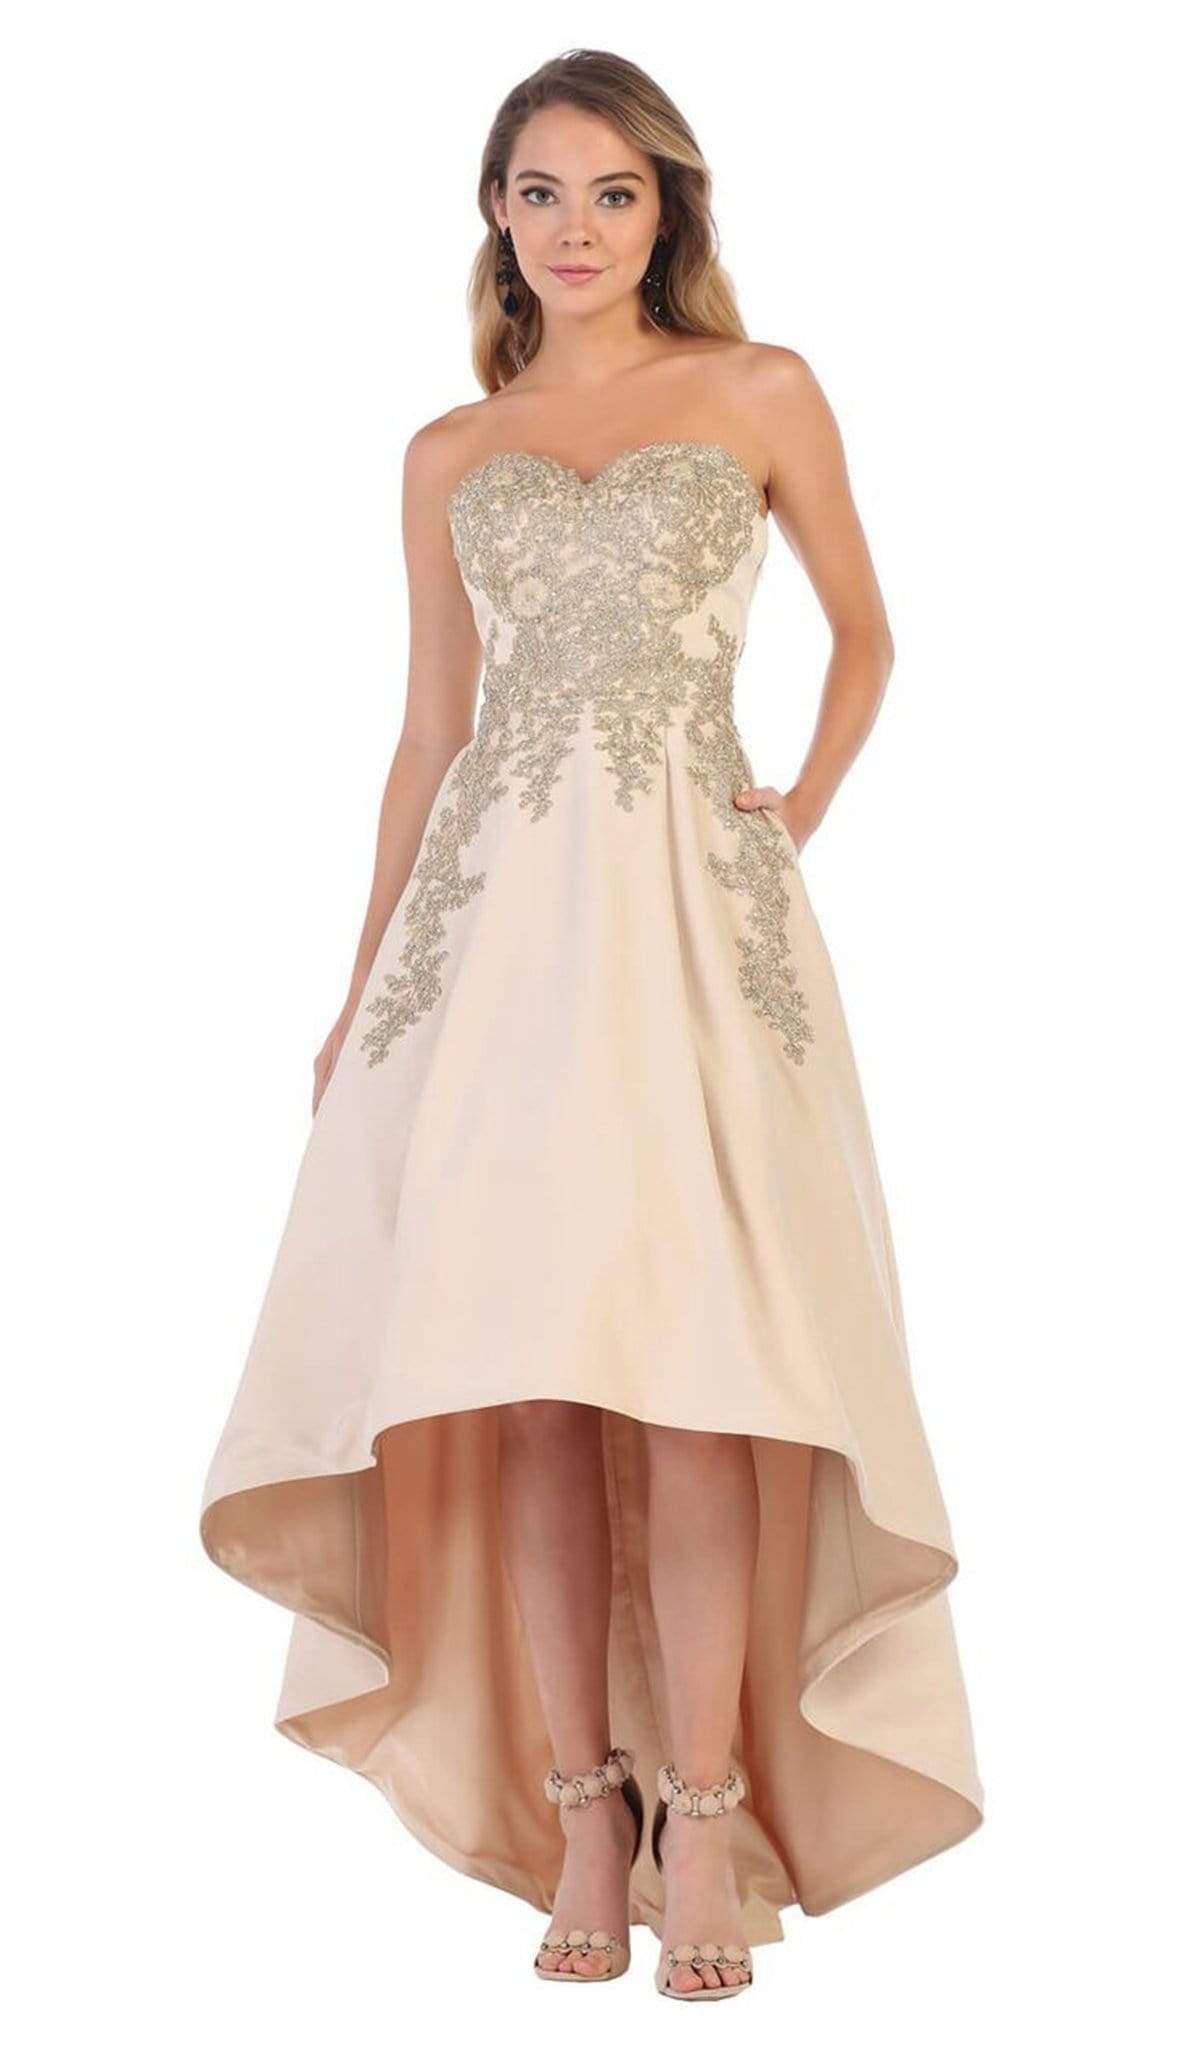 May Queen - MQ1627 Gilt-Appliqued Sweetheart High Low Gown Special Occasion Dress 4 / Champagne